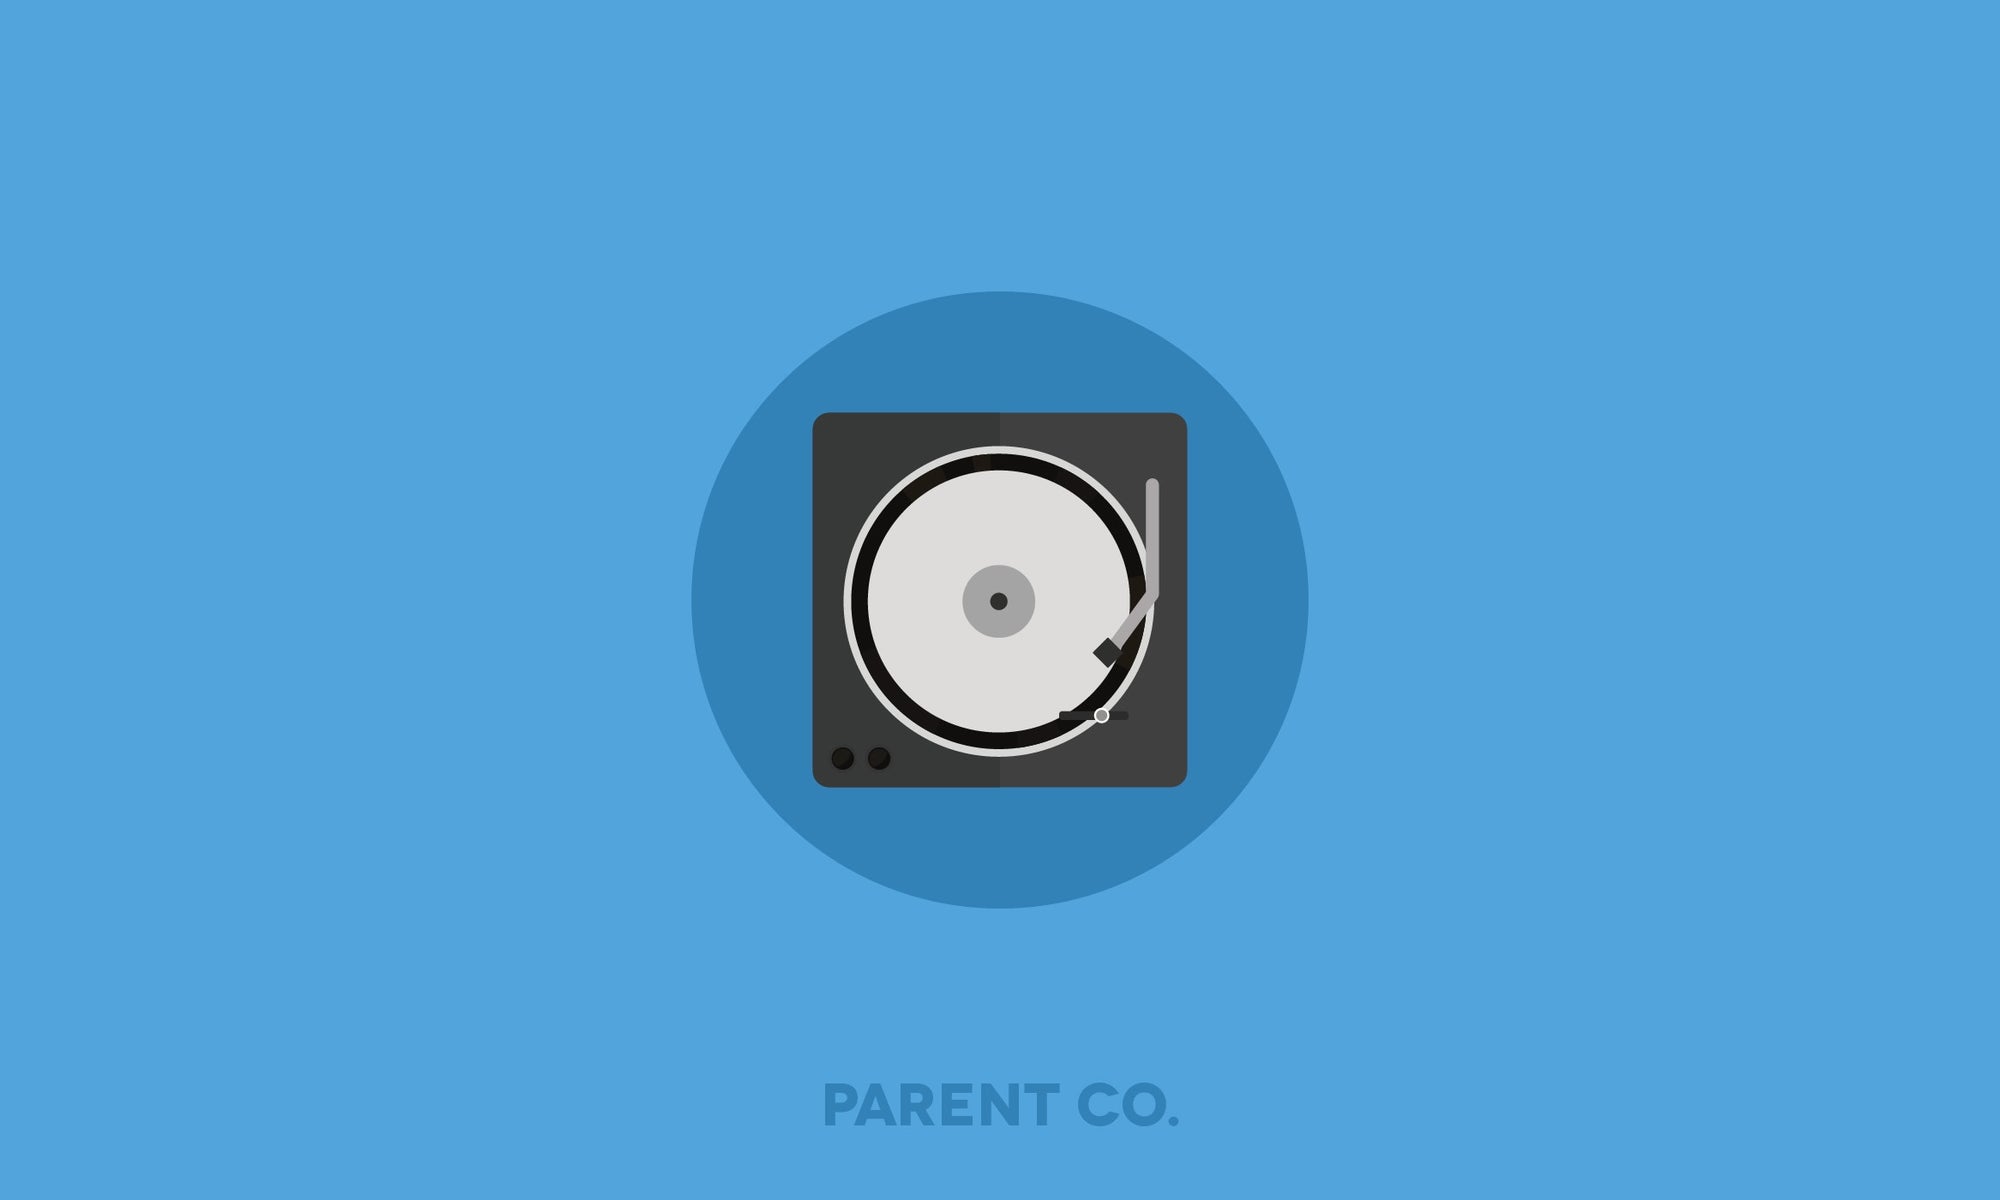 icon of record plater with parent.co logo